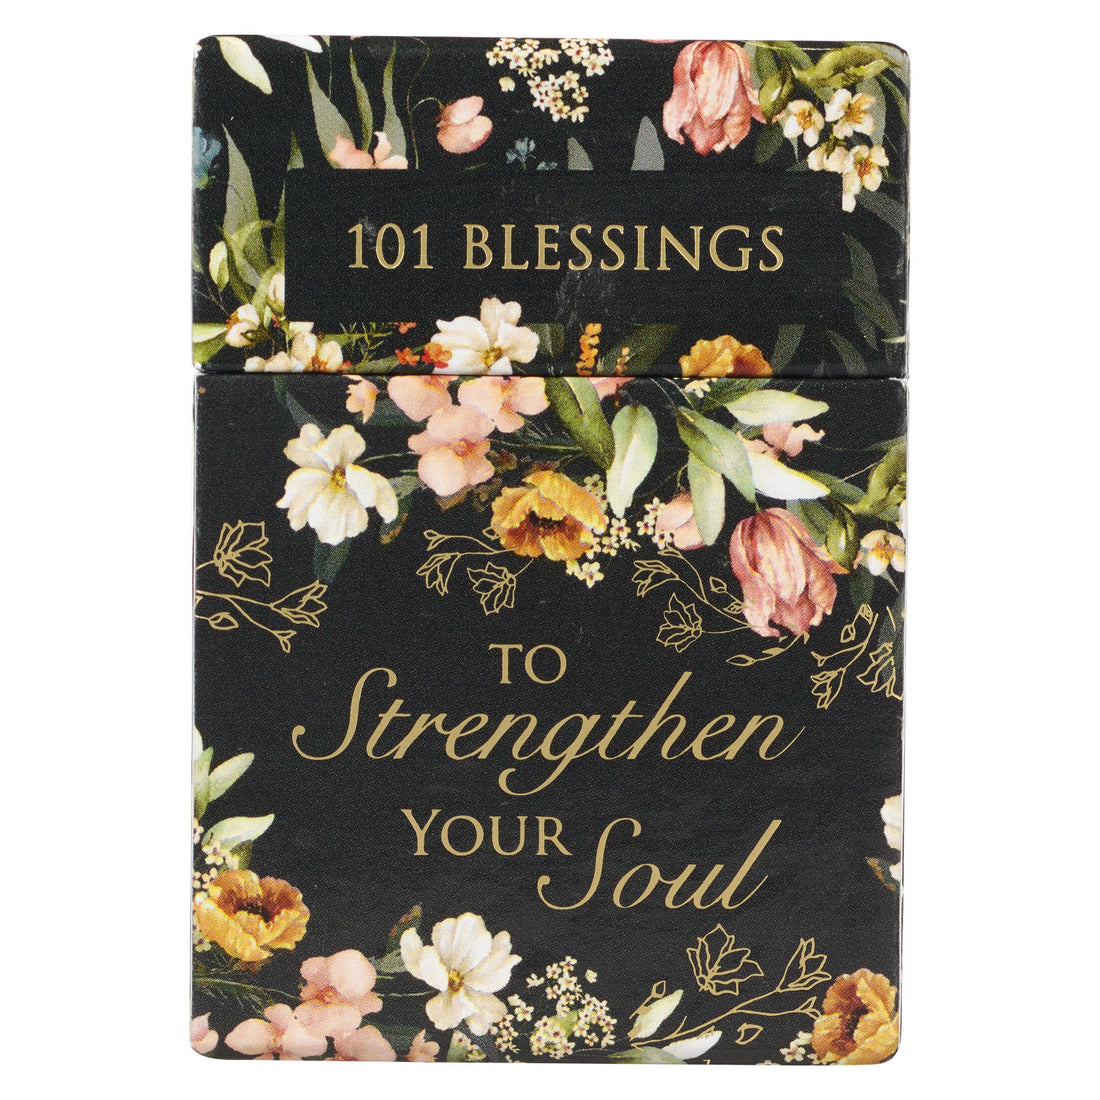 Seed of Abraham Christian Bookstore - (In)Courage - Box of Blessings-Strengthen Your Soul